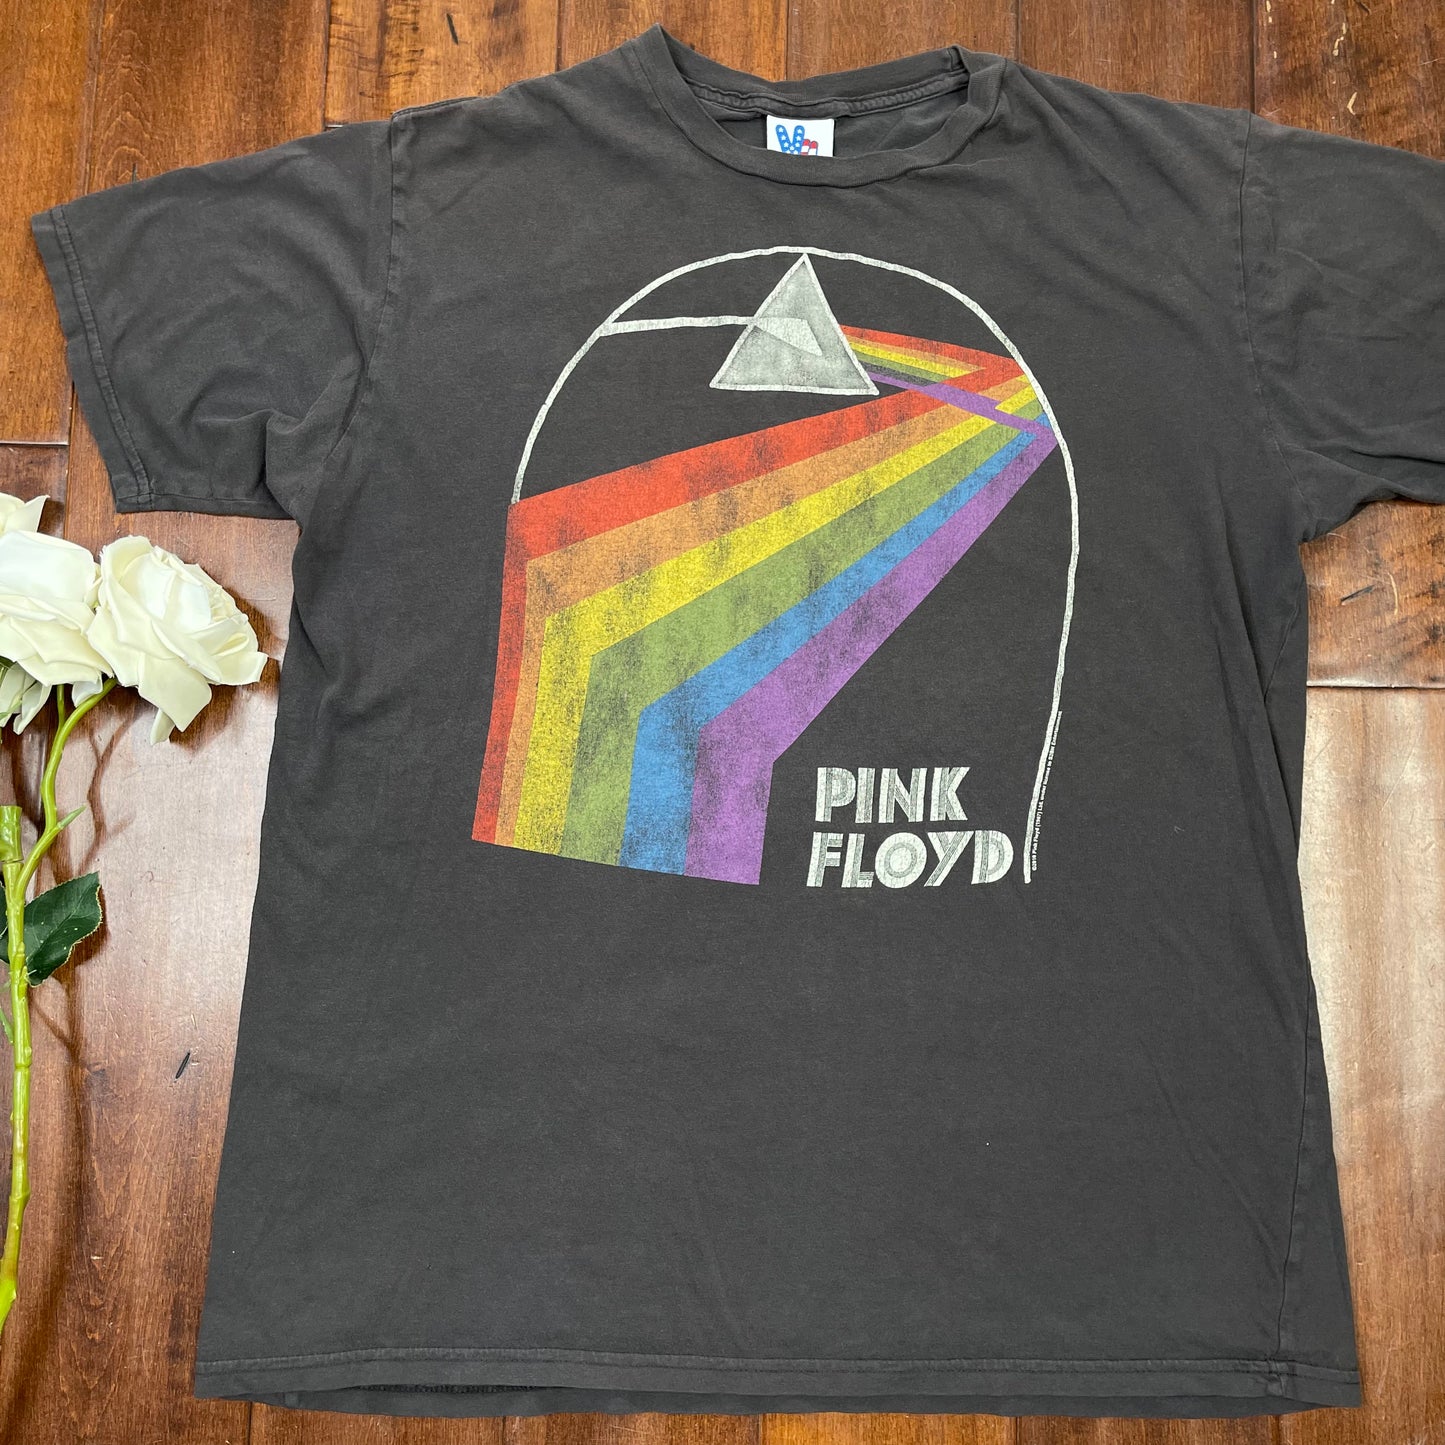 THRIFTED “PINK FLOYD” T-SHIRT